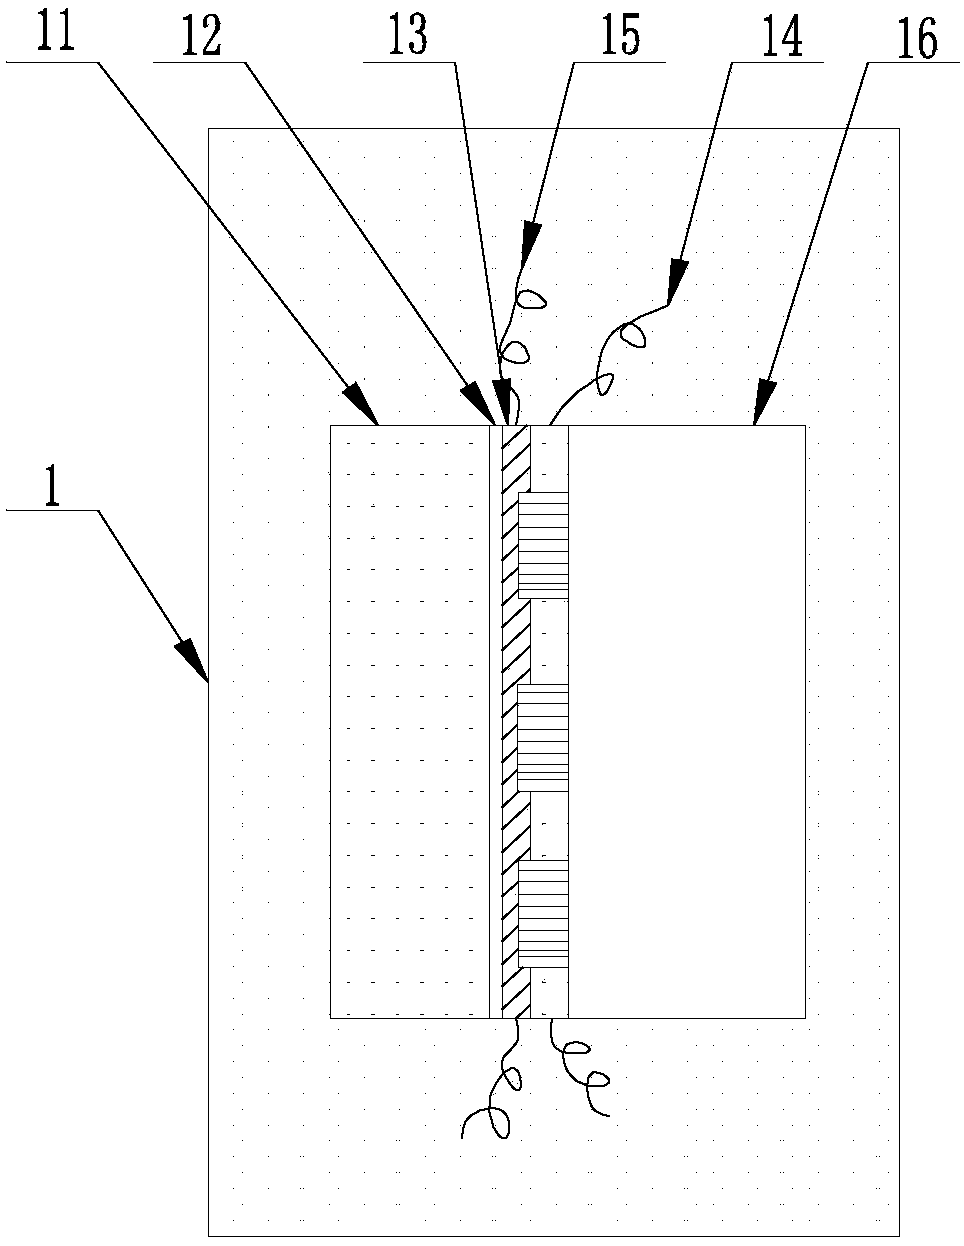 Energy measurement and calibration system for large-scale laser devices